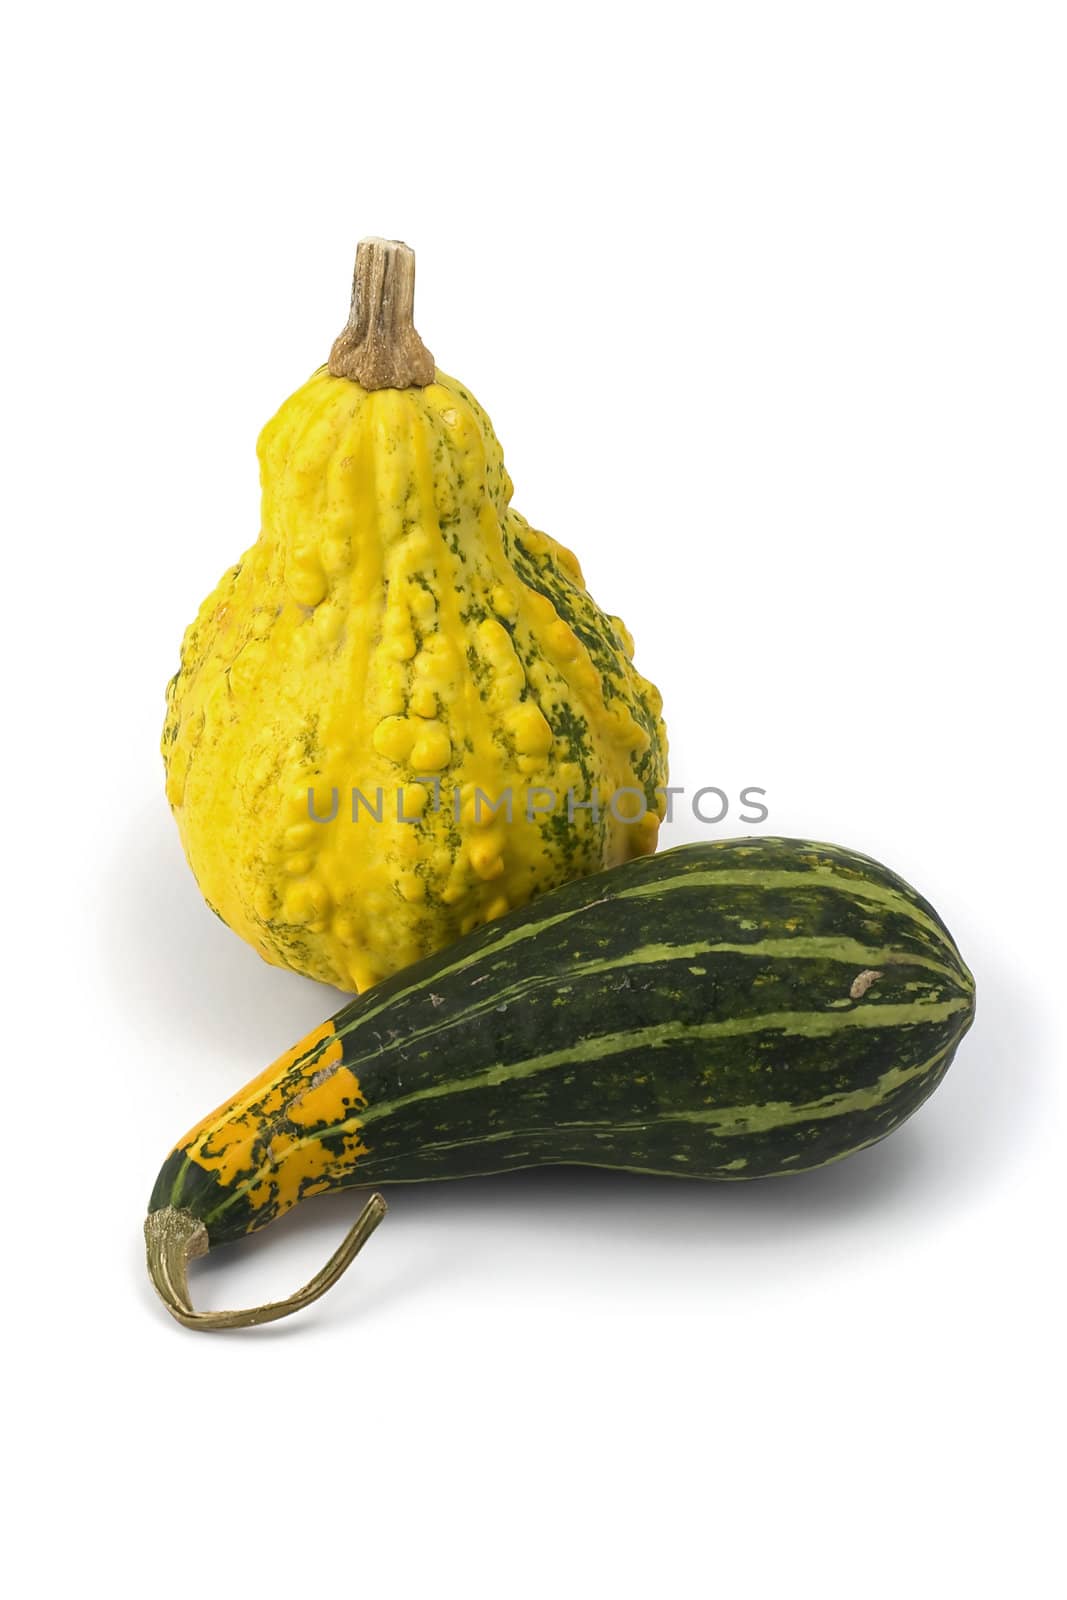 Green and yellow ornamental pumpkins often used as decoration.